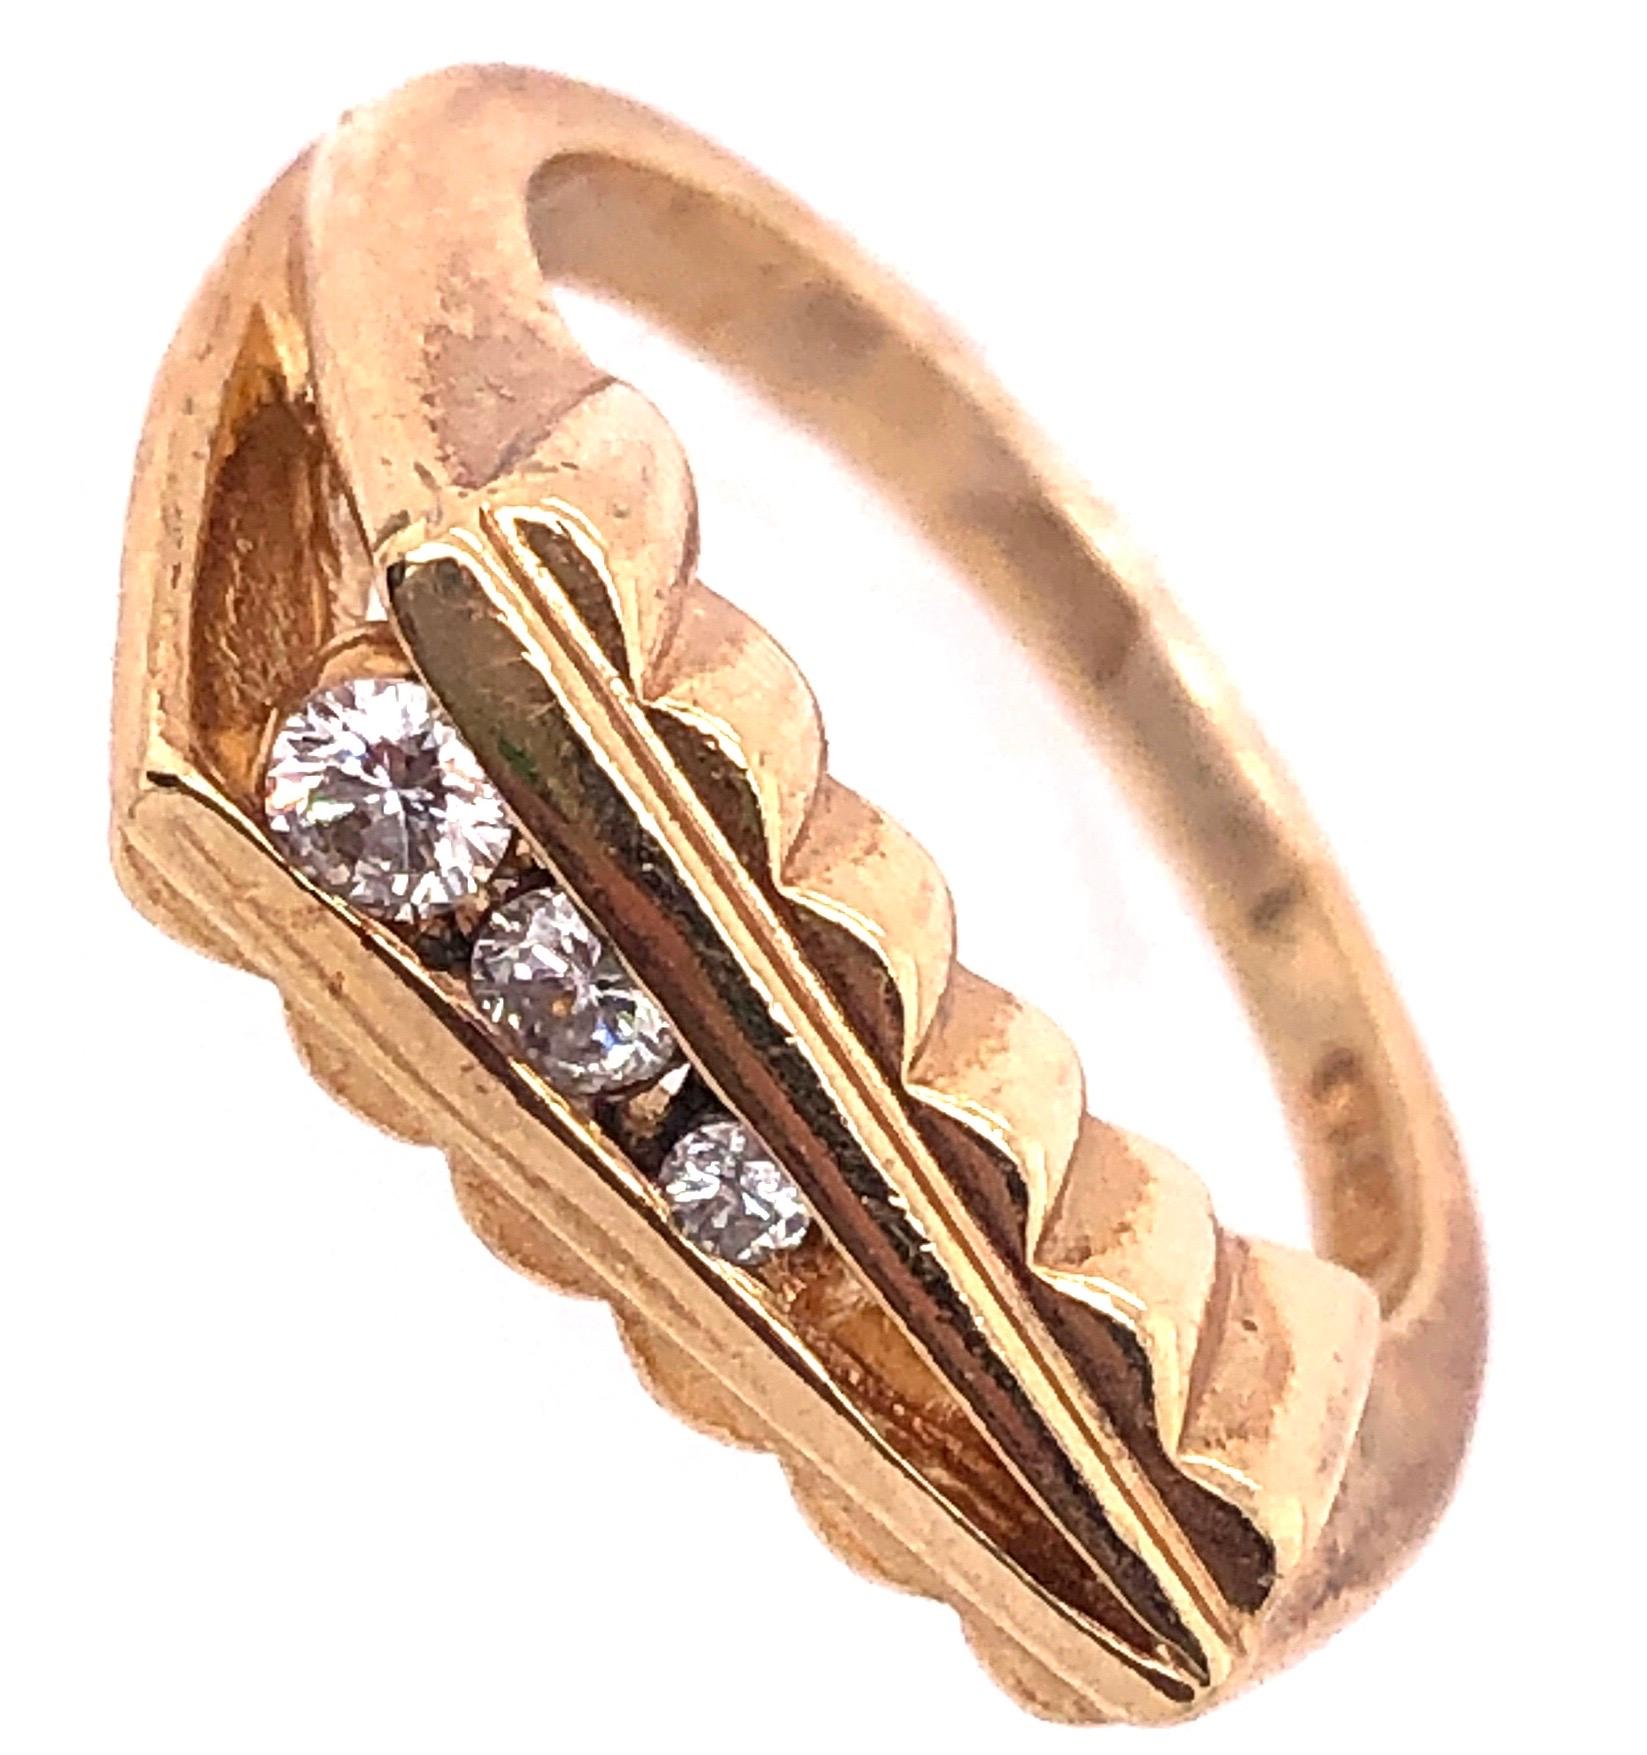 14 Karat Yellow Gold Contemporary Ring with Round Diamonds 0.20 TDW.
Size 6.25
6.10 grams total weight.